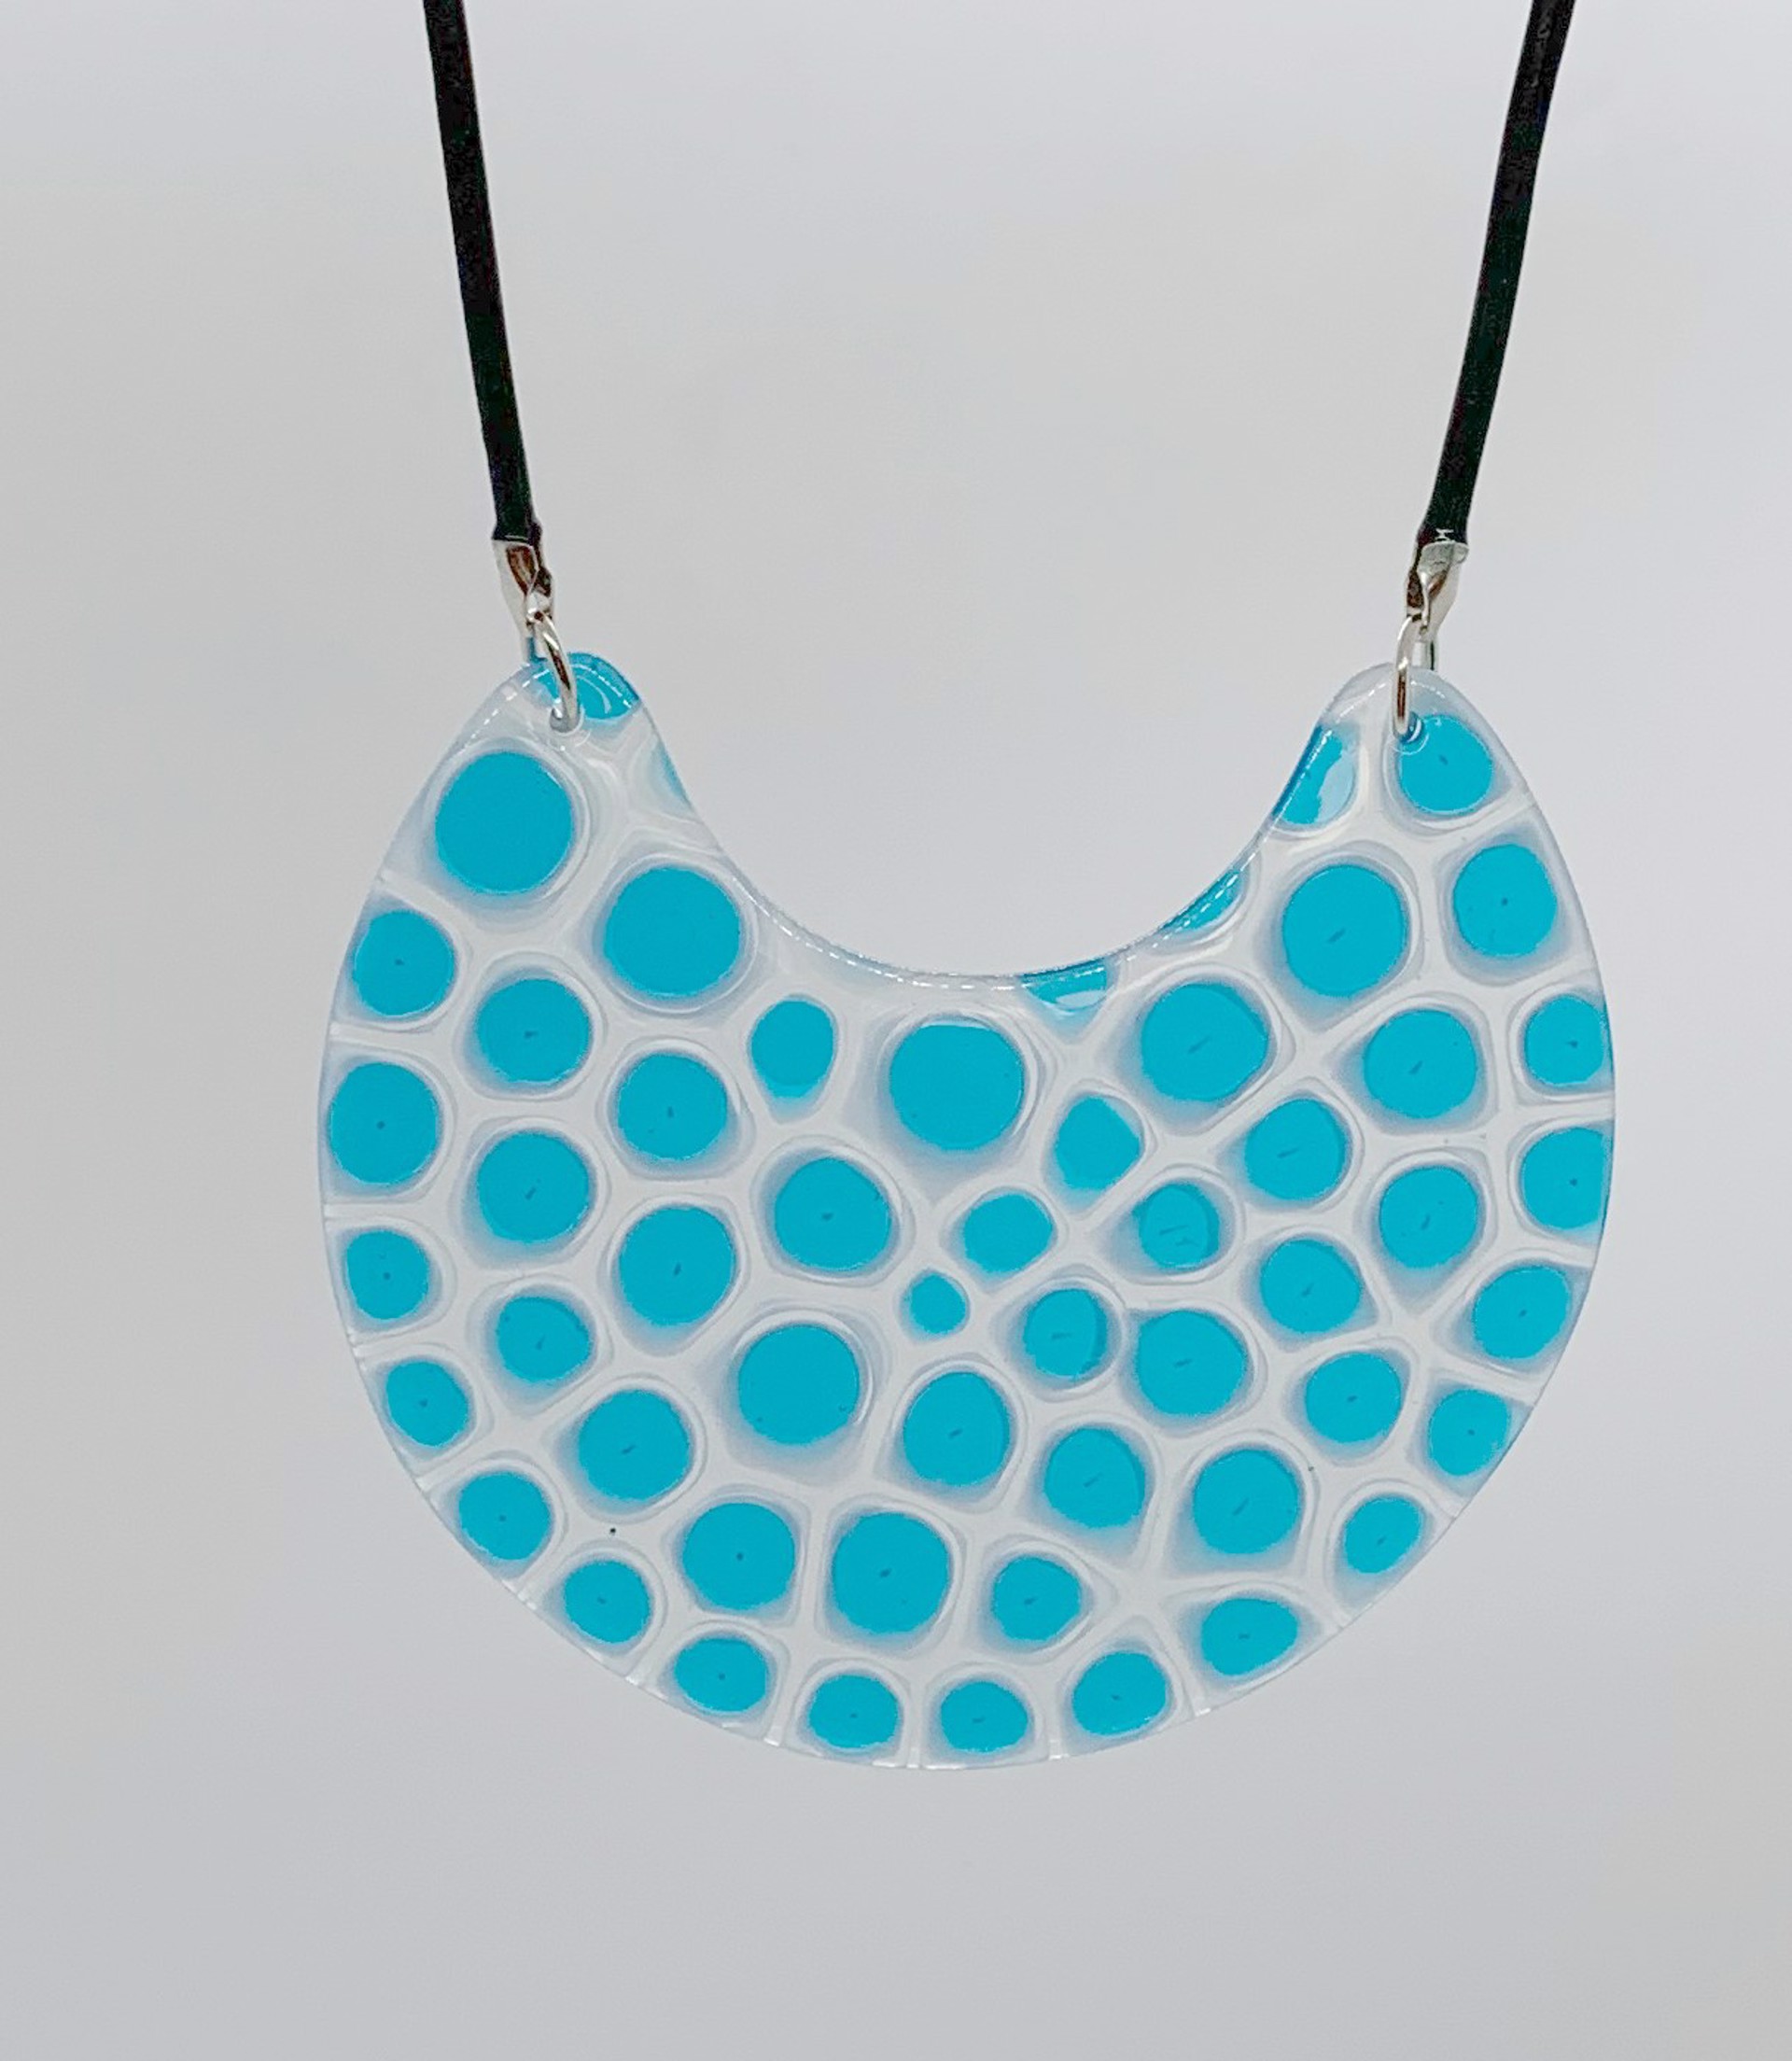 Murrini Missing Bite Necklace by Chris Cox